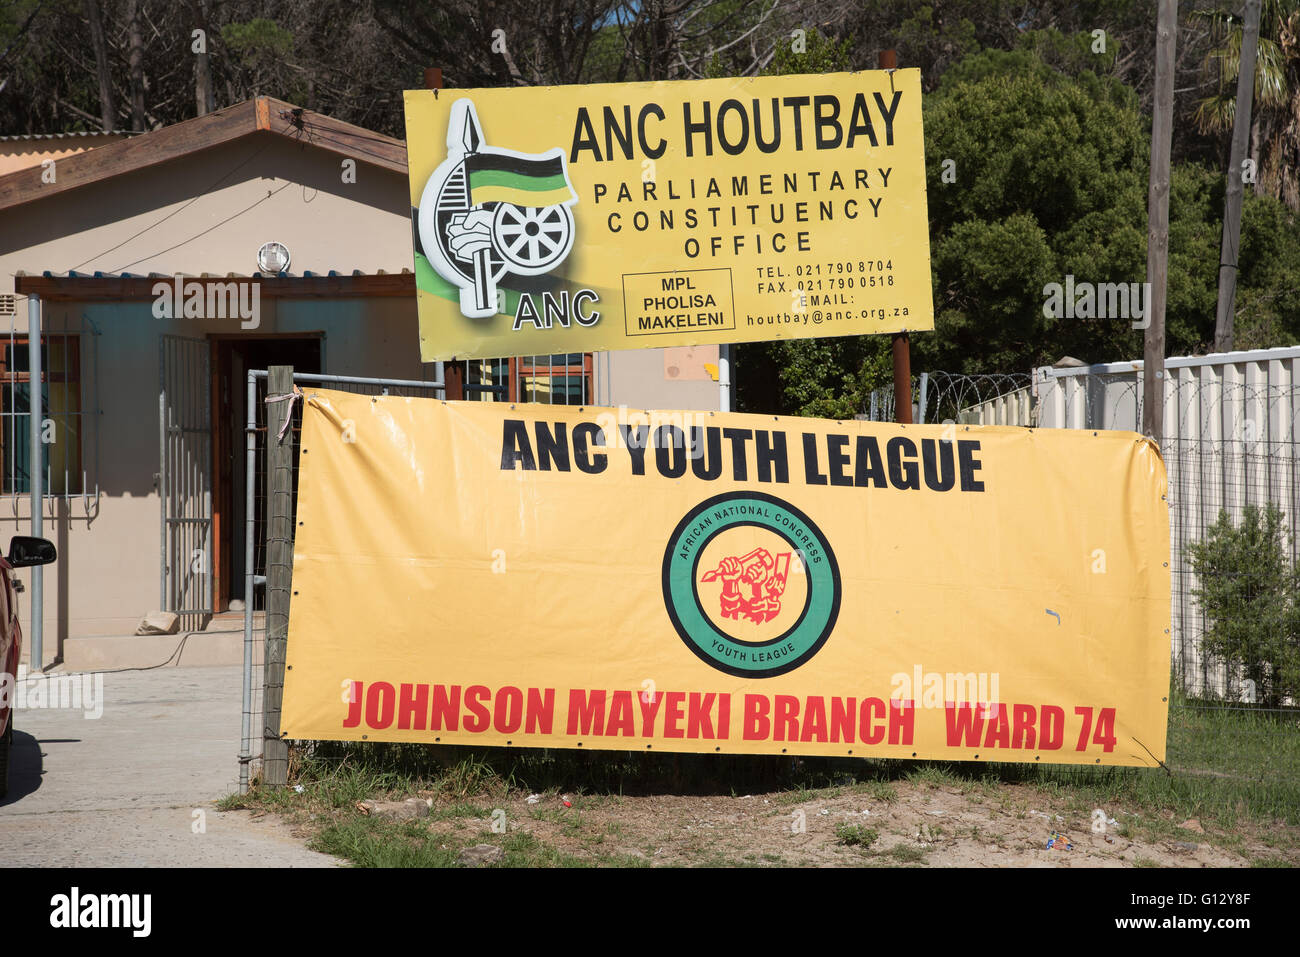 ANC HOUTBAY WESTERN CAPE SOUTH AFRICA  The ANC political party with the ANC Youth League office at Houtbay Southern Africa Stock Photo